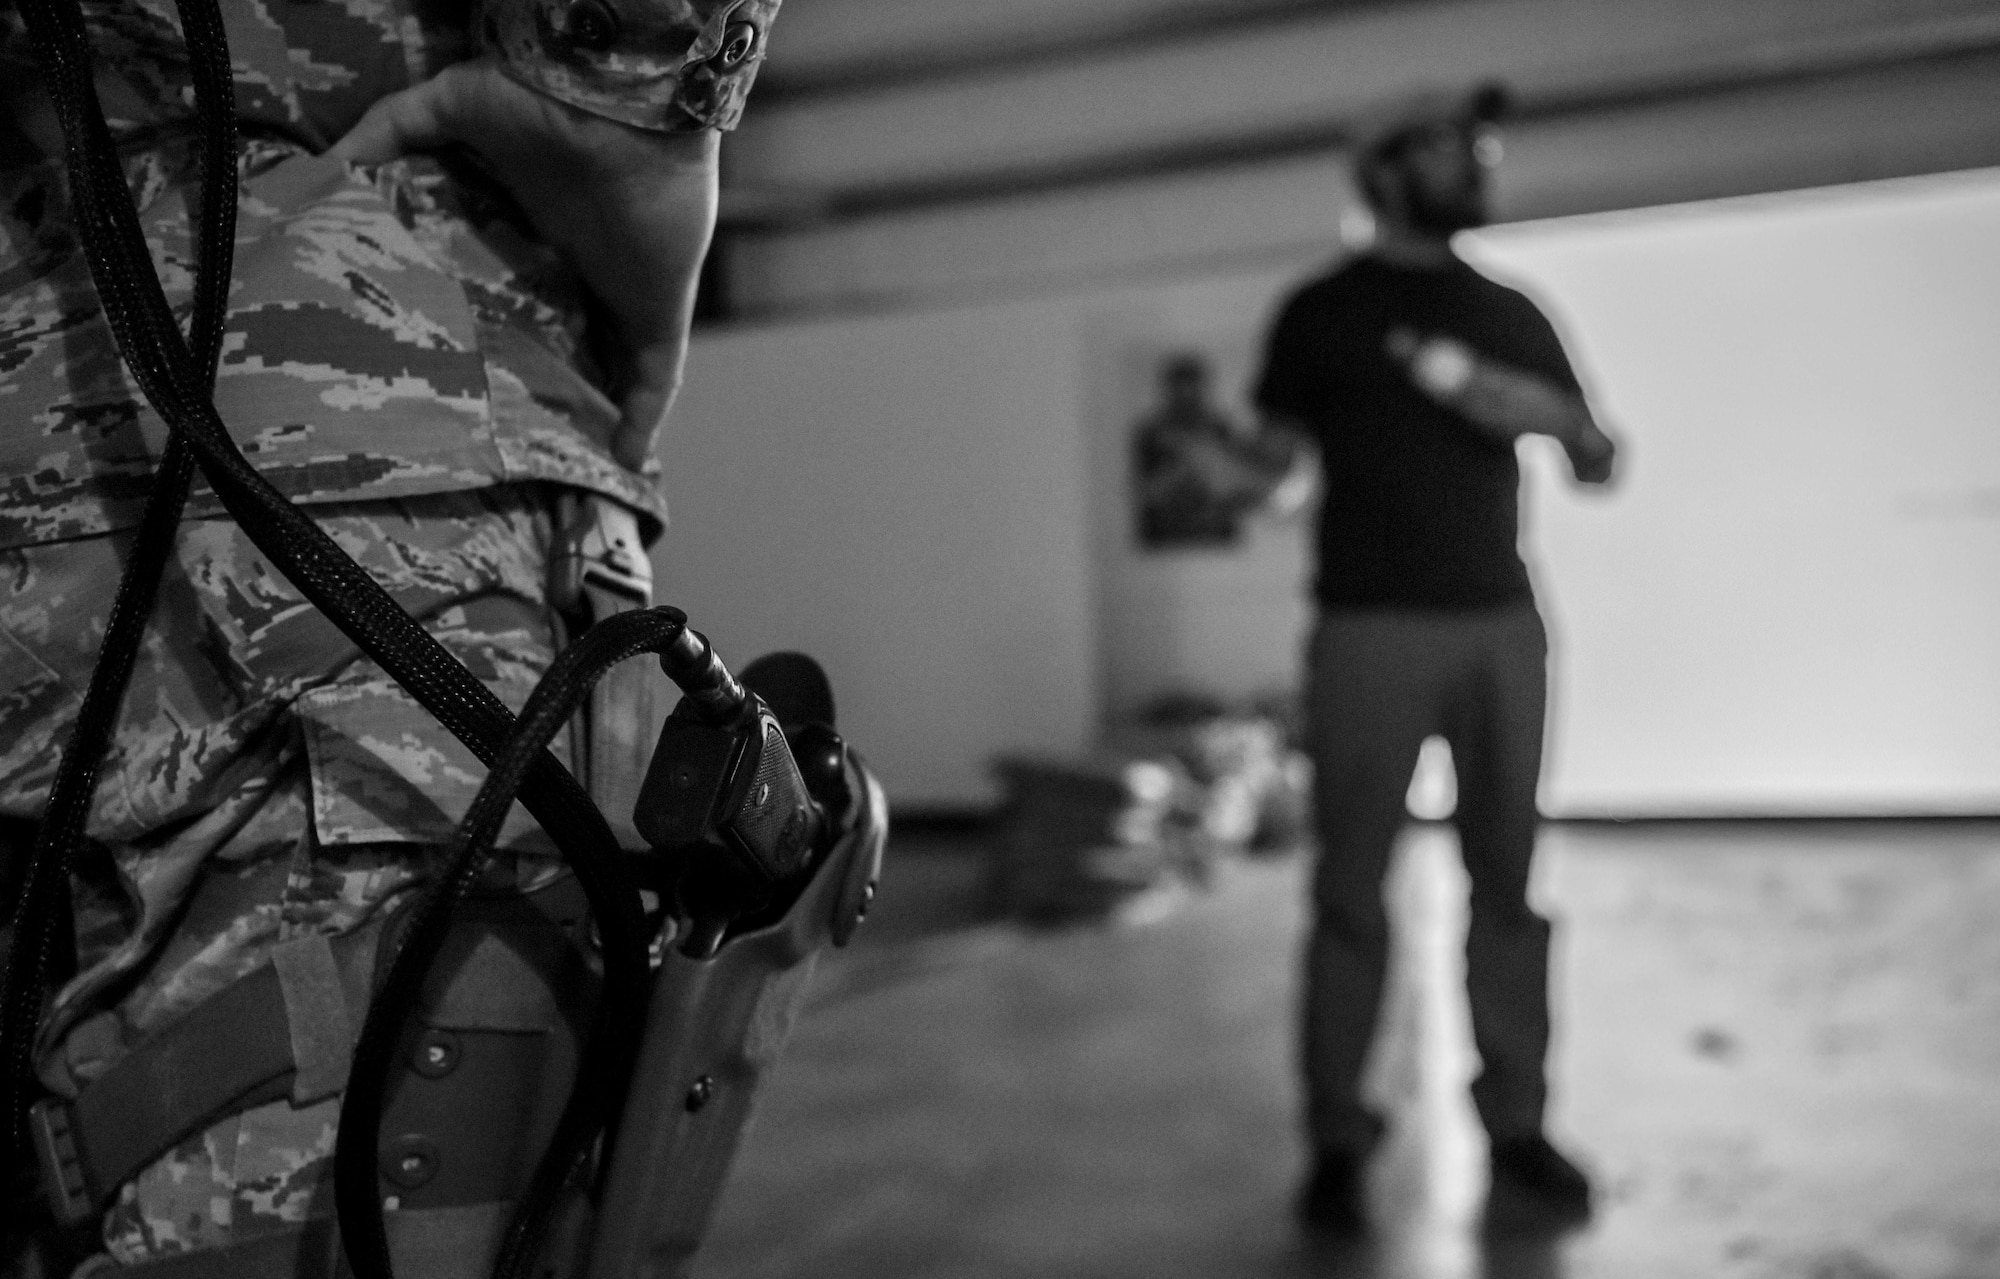 U.S. Army Bryan Reed, Warrior Training Alliance instructor, explains to 627th Security Forces Squadron (SFS) Airmen the process for training with a simulator that puts the defenders through various scenarios to test them on use of force and other tactics at Joint Base Lewis-McChord, Wash., April 30, 2019. The Warrior Training Alliance is just one of several opportunities the 627th SFS can take advantage of as a part of the Reconstitute Defender Initiative that was implemented by top Air Force leaders. (U.S. Air Force photo by Senior Airman Tryphena Mayhugh)